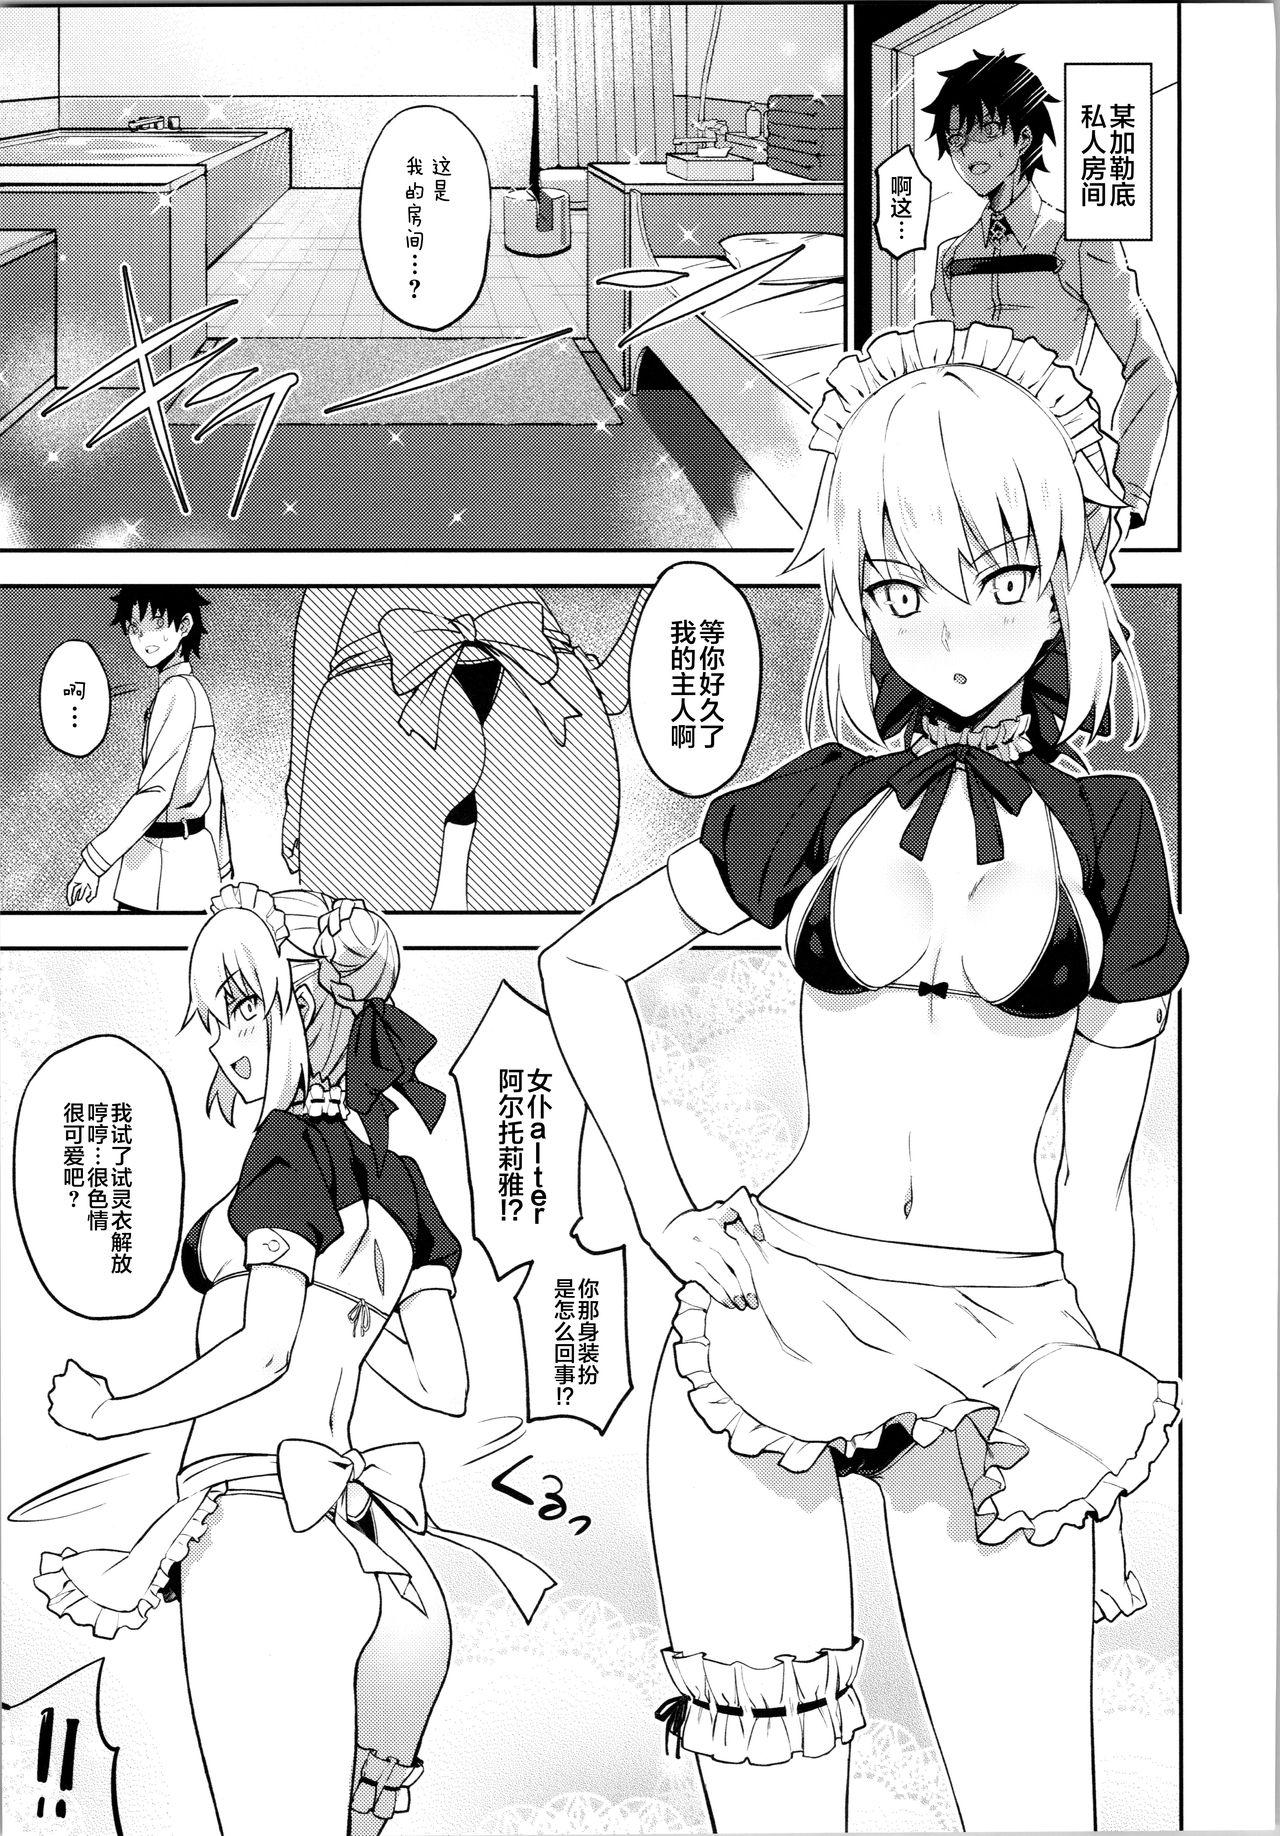 Orgy Chaldea Soap SSS-kyuu Gohoushi Maid - Fate grand order Dick Sucking Porn - Page 3